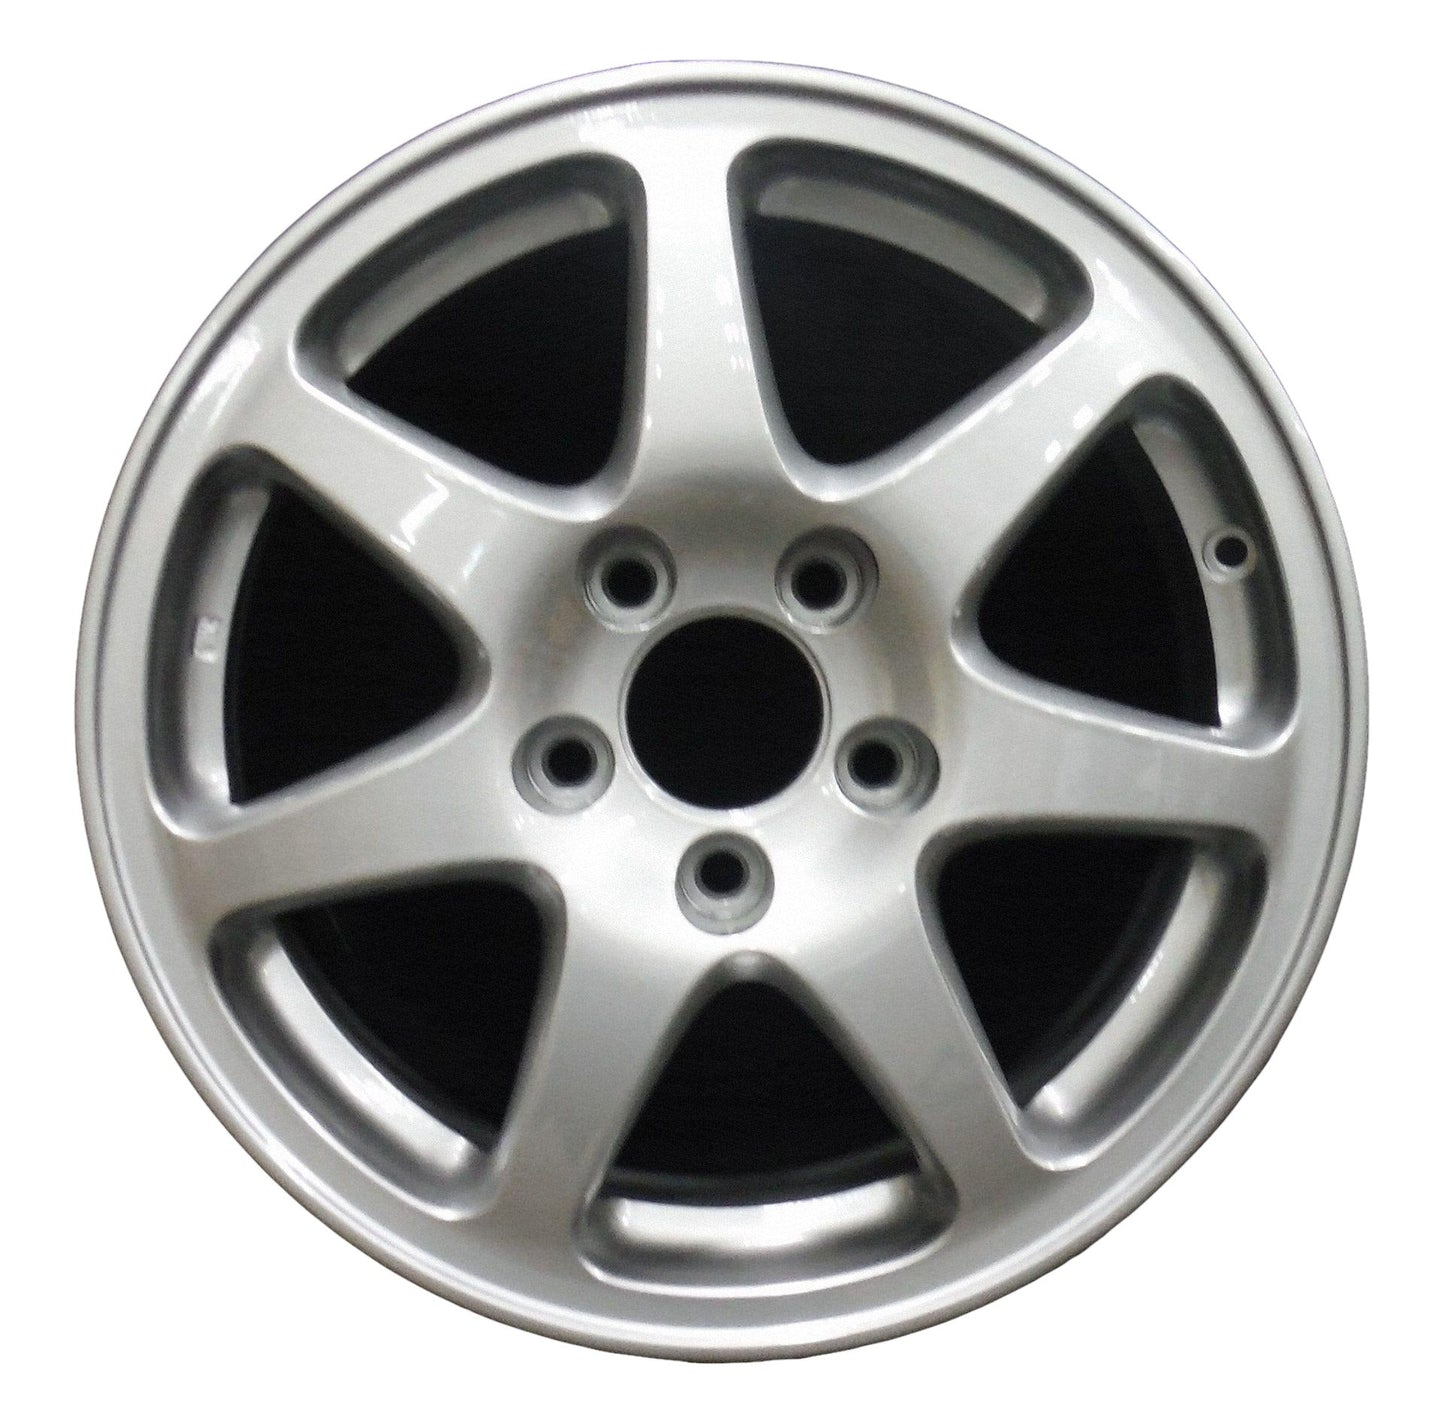 Acura NSX  1994, 1995, 1996, 1997, 1998, 1999, 2000, 2001, 2002 Factory OEM Car Wheel Size 16x7 Alloy WAO.71661FT.LS11.FF